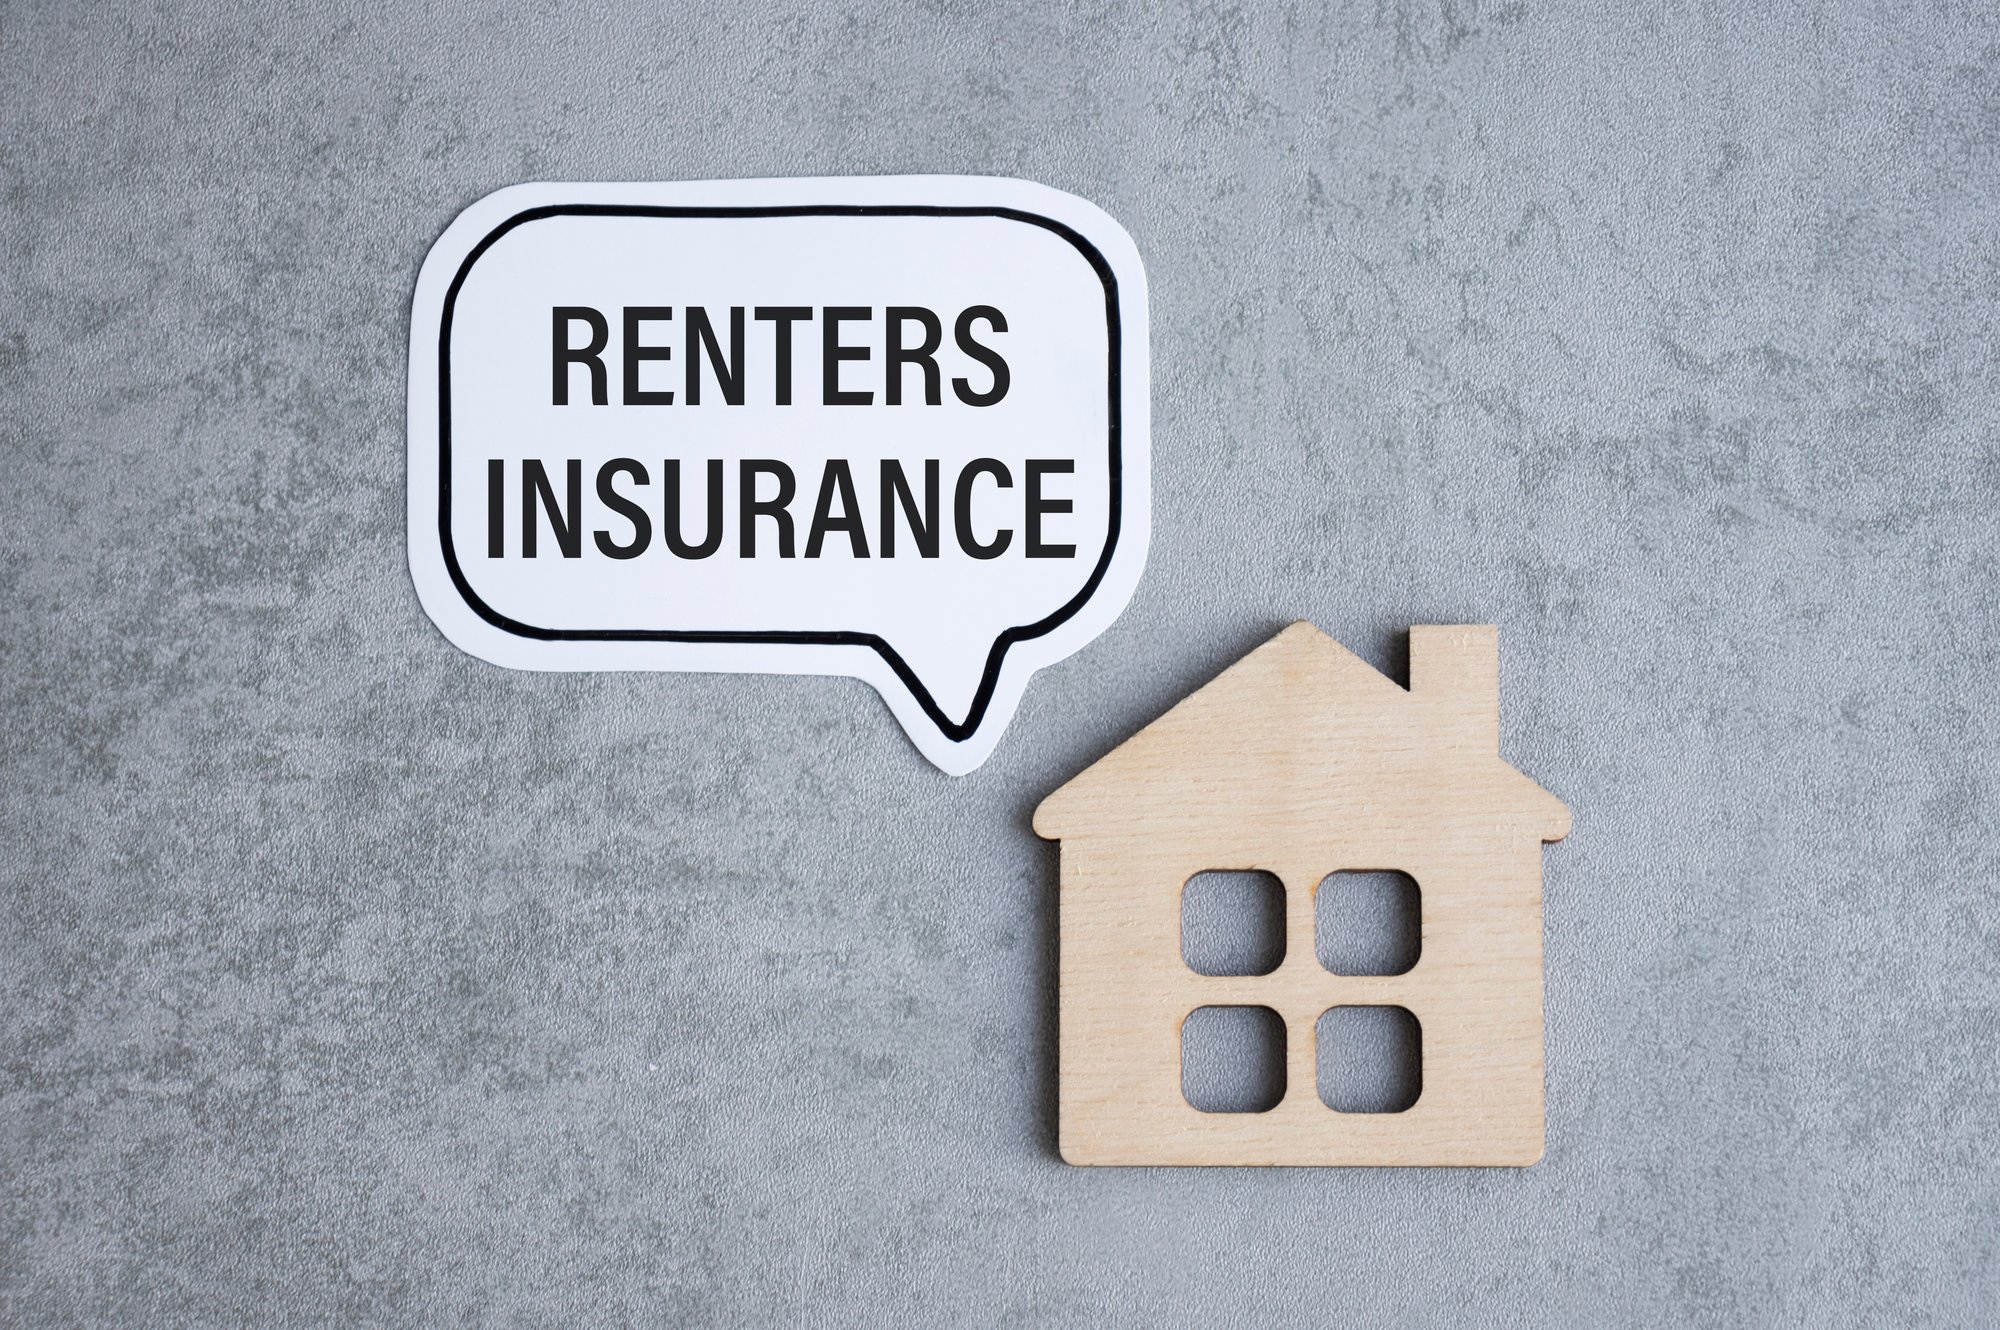 Applying for a Renters Insurance, Renters Insurance application